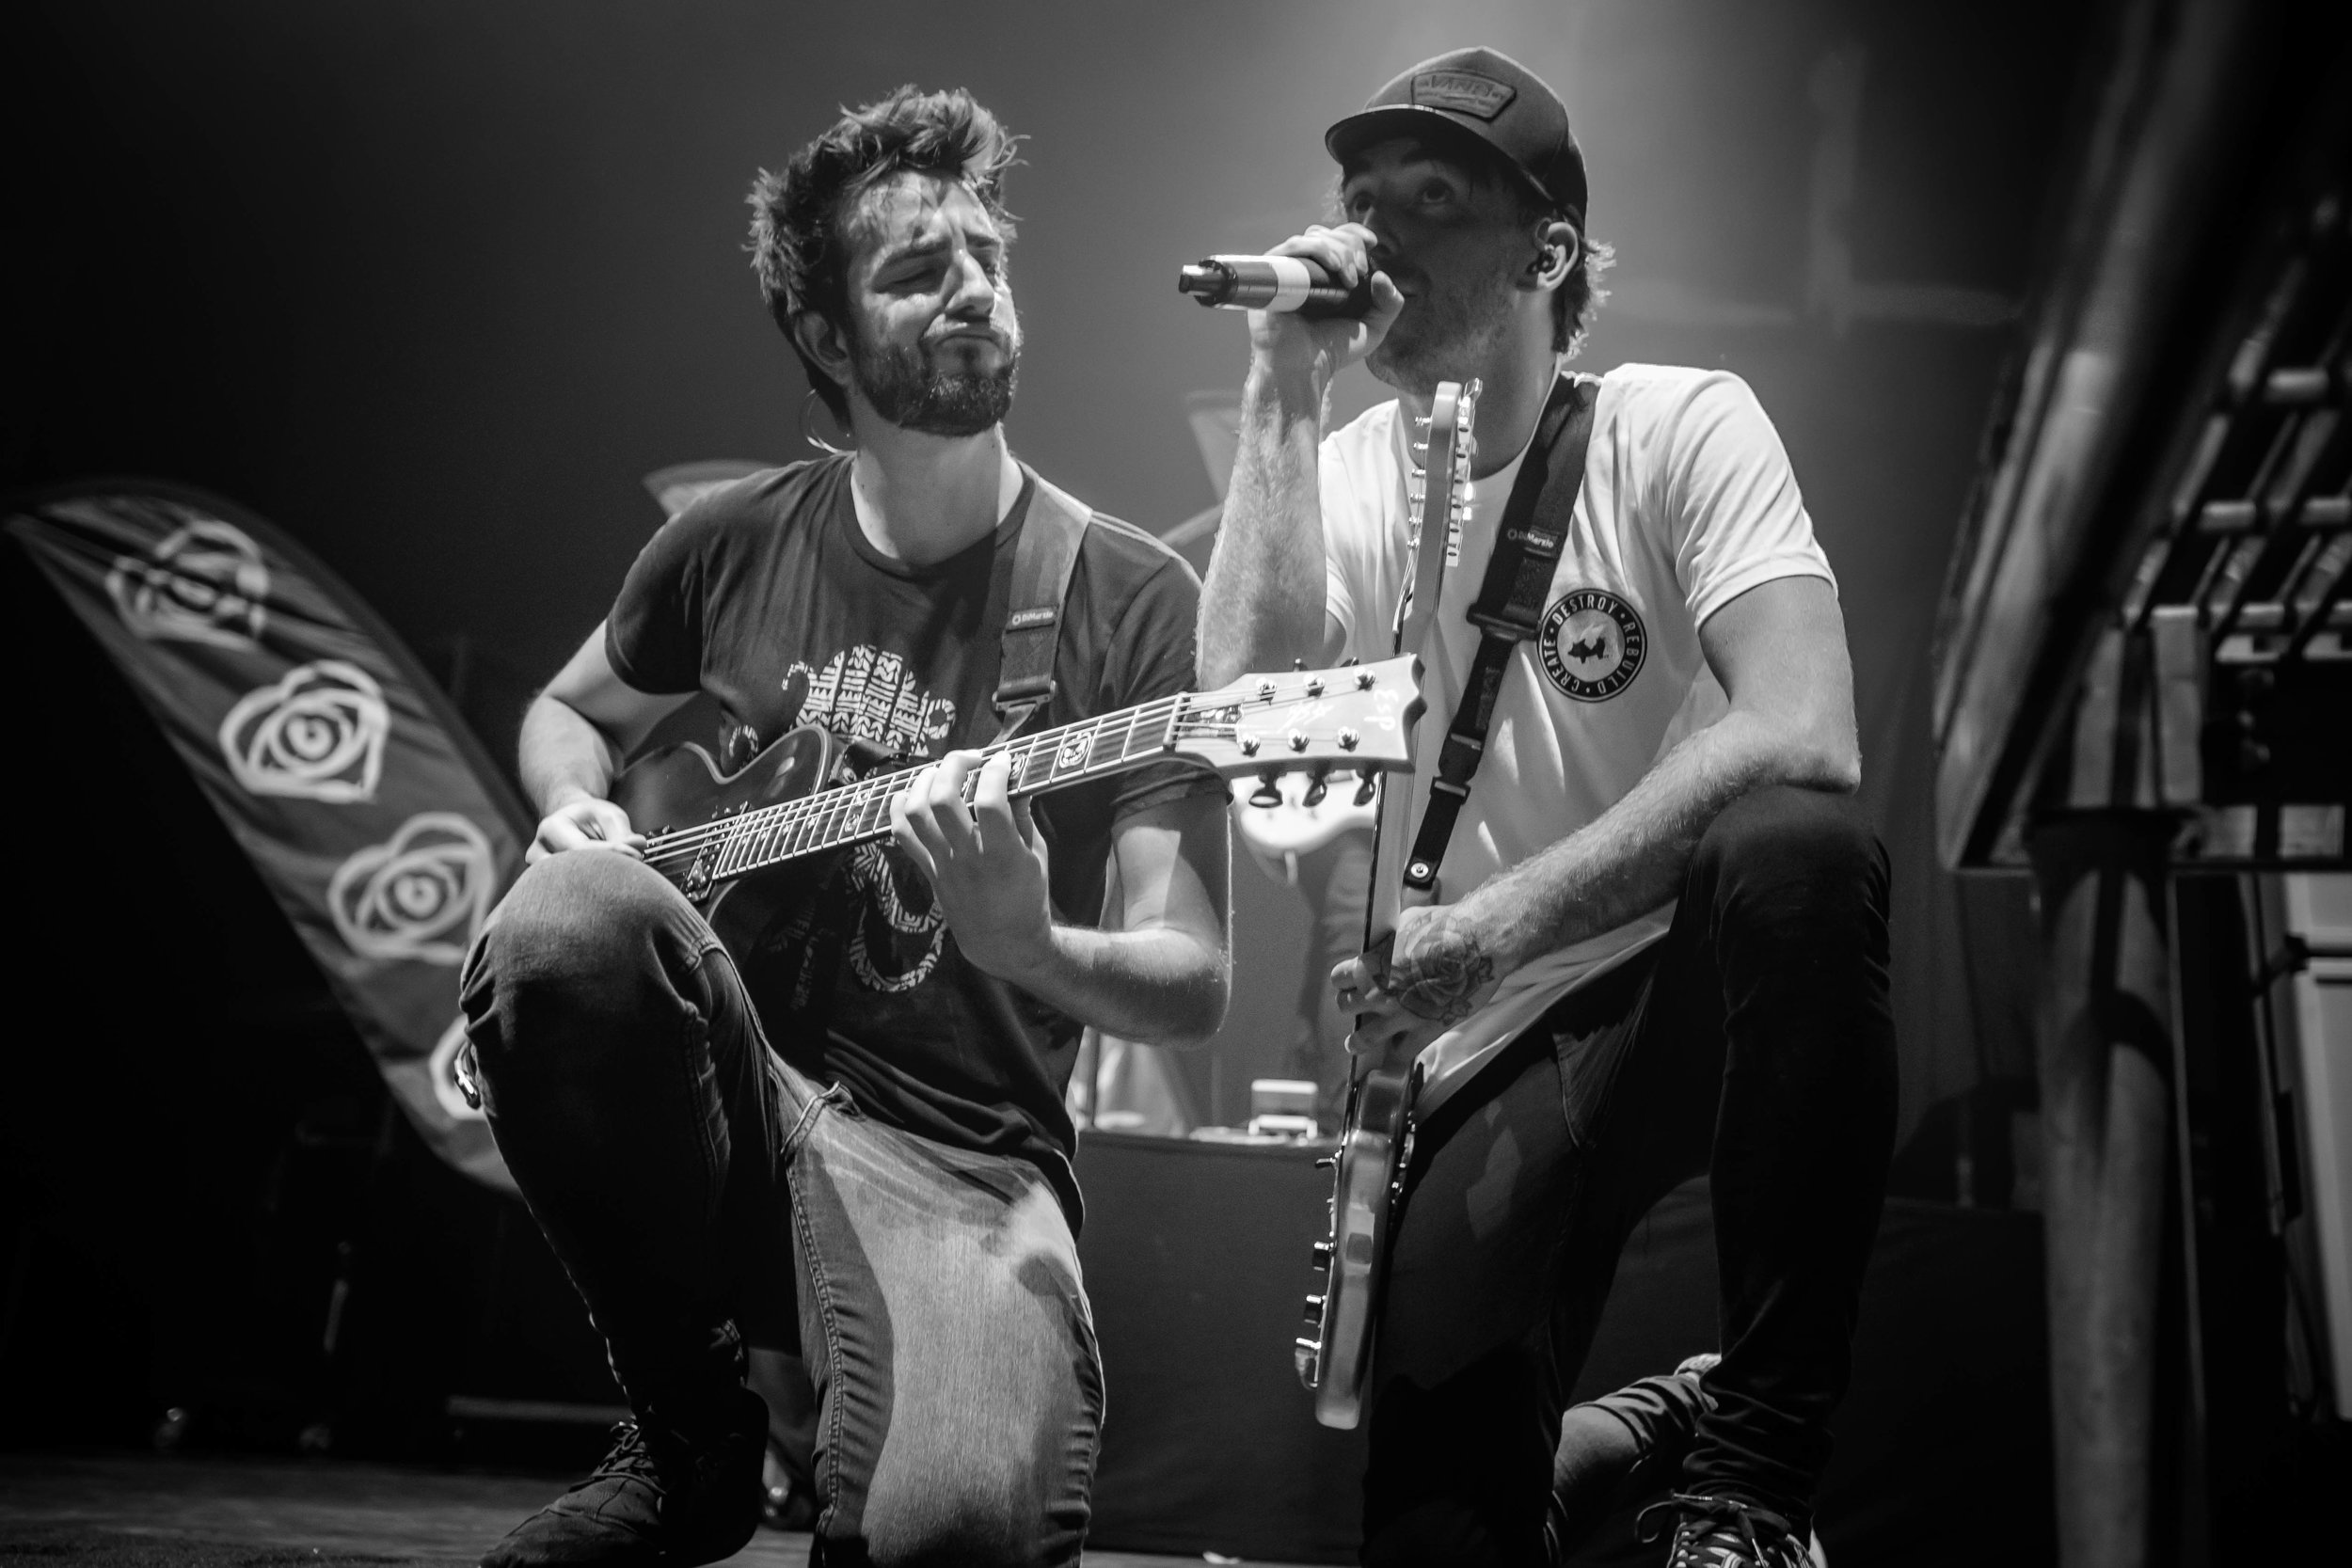  Jack Barakat and Alex Gaskarth of All Time Low at The Forum 